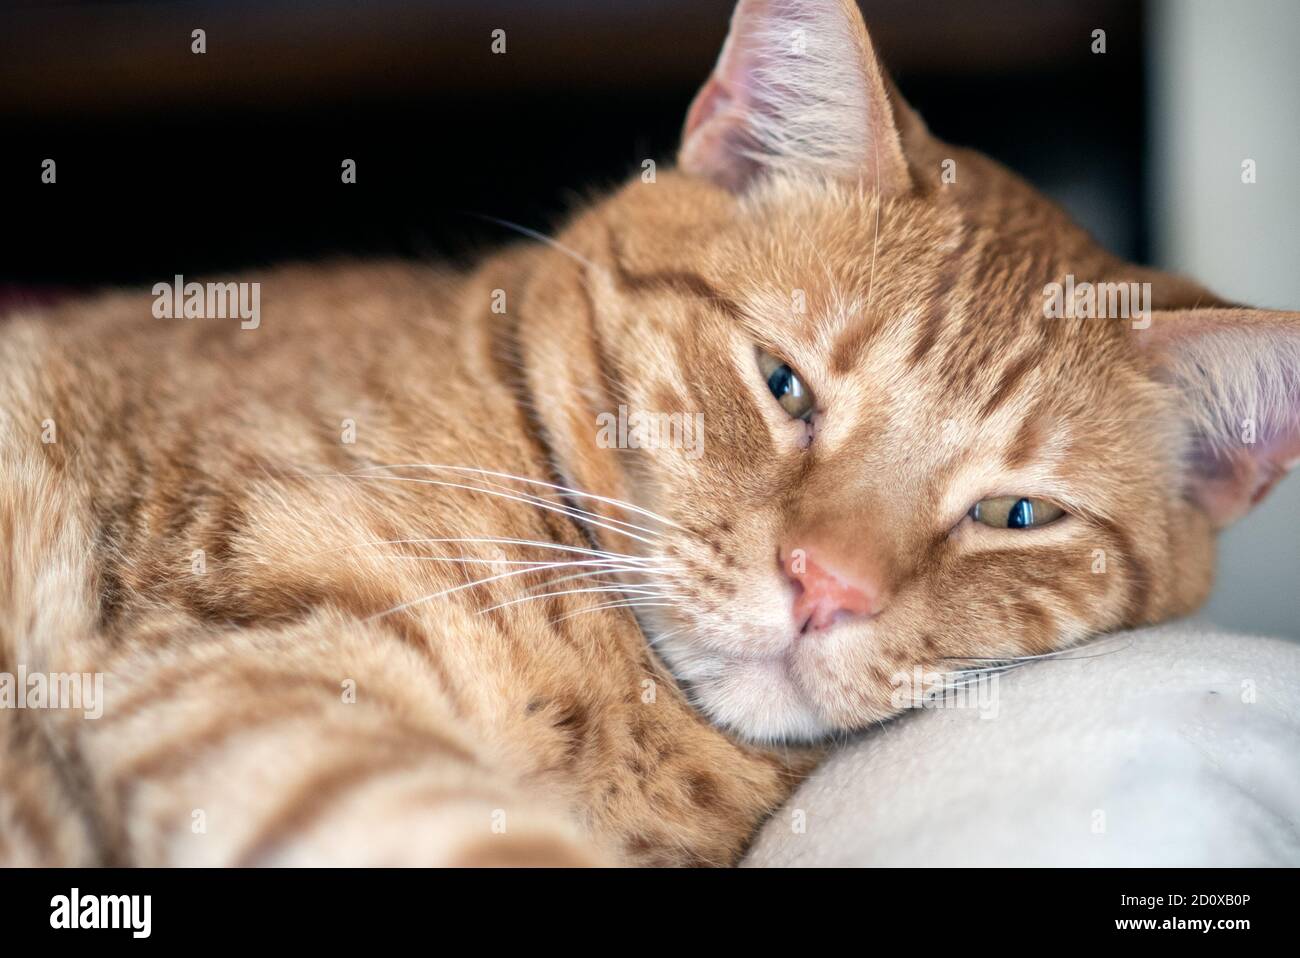 Orange and striped tabby cat has sleepy eyes while resting tired head on comfortable pillow. Stock Photo